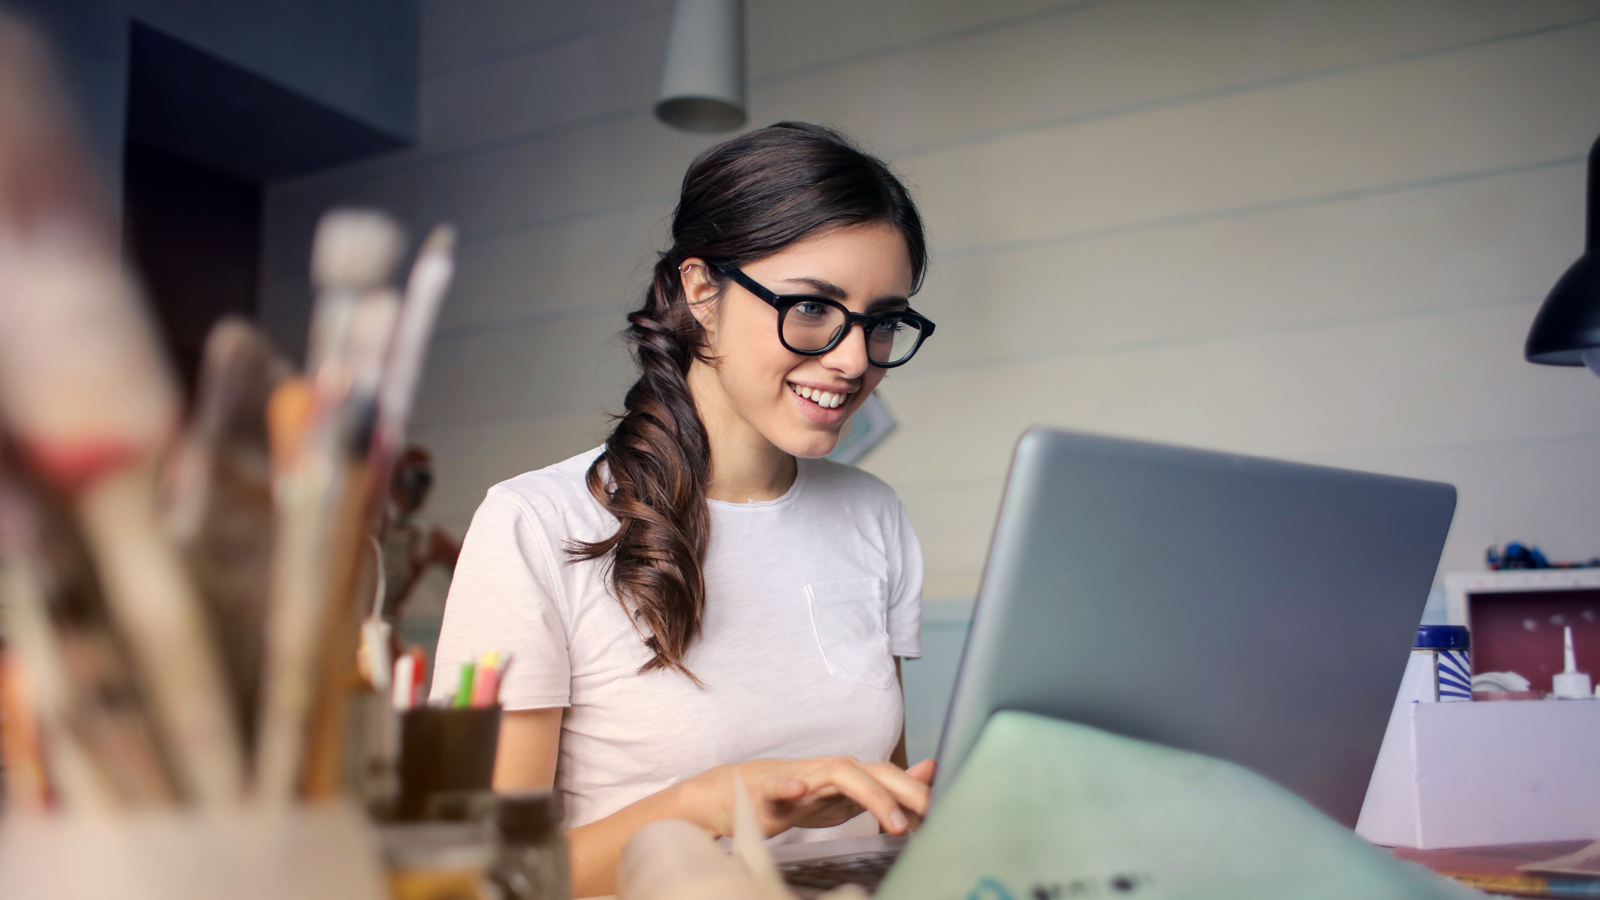 Lady in glasses looking at laptop working and smiling